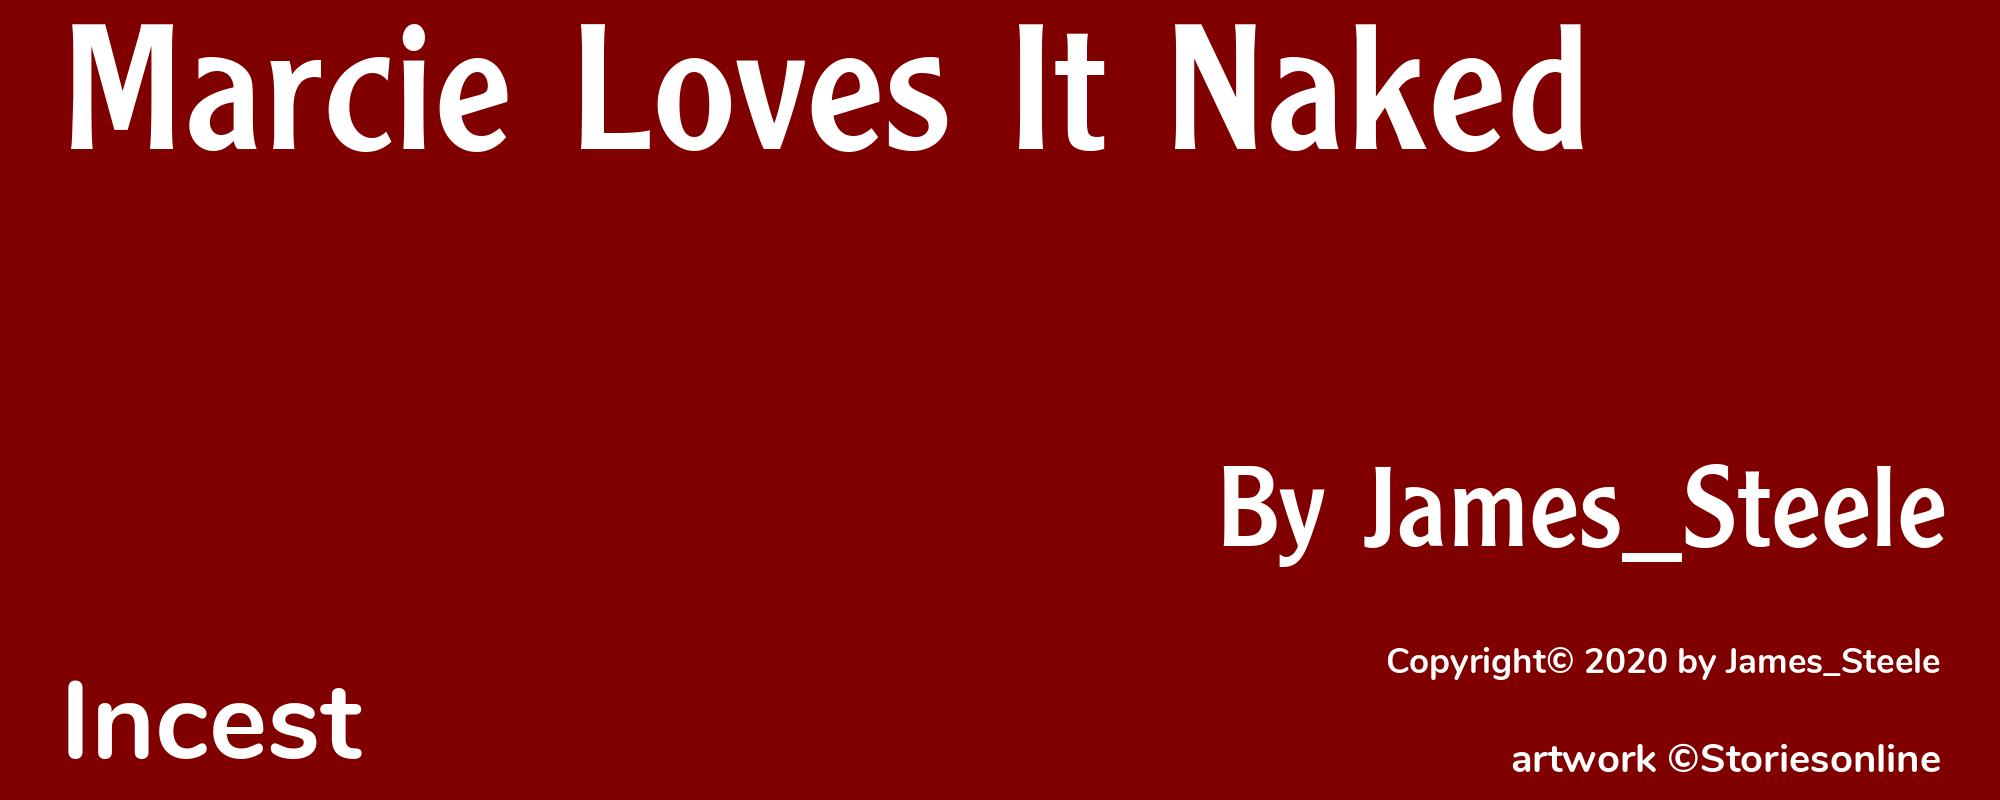 Marcie Loves It Naked - Cover